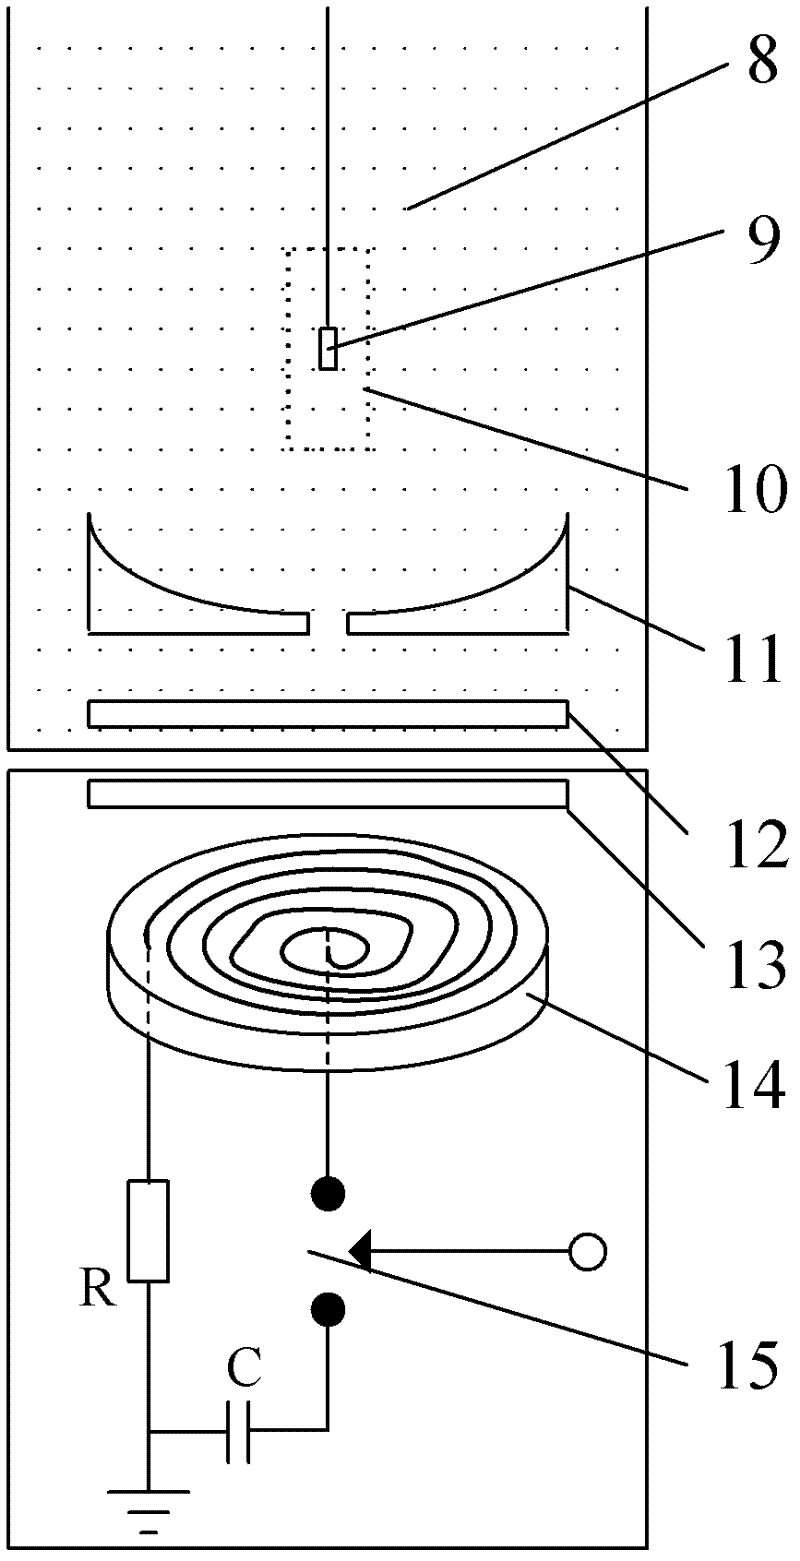 Polymer film optical fiber F-P cavity-based underwater shock pressure sensor and dynamic calibration experiment system thereof